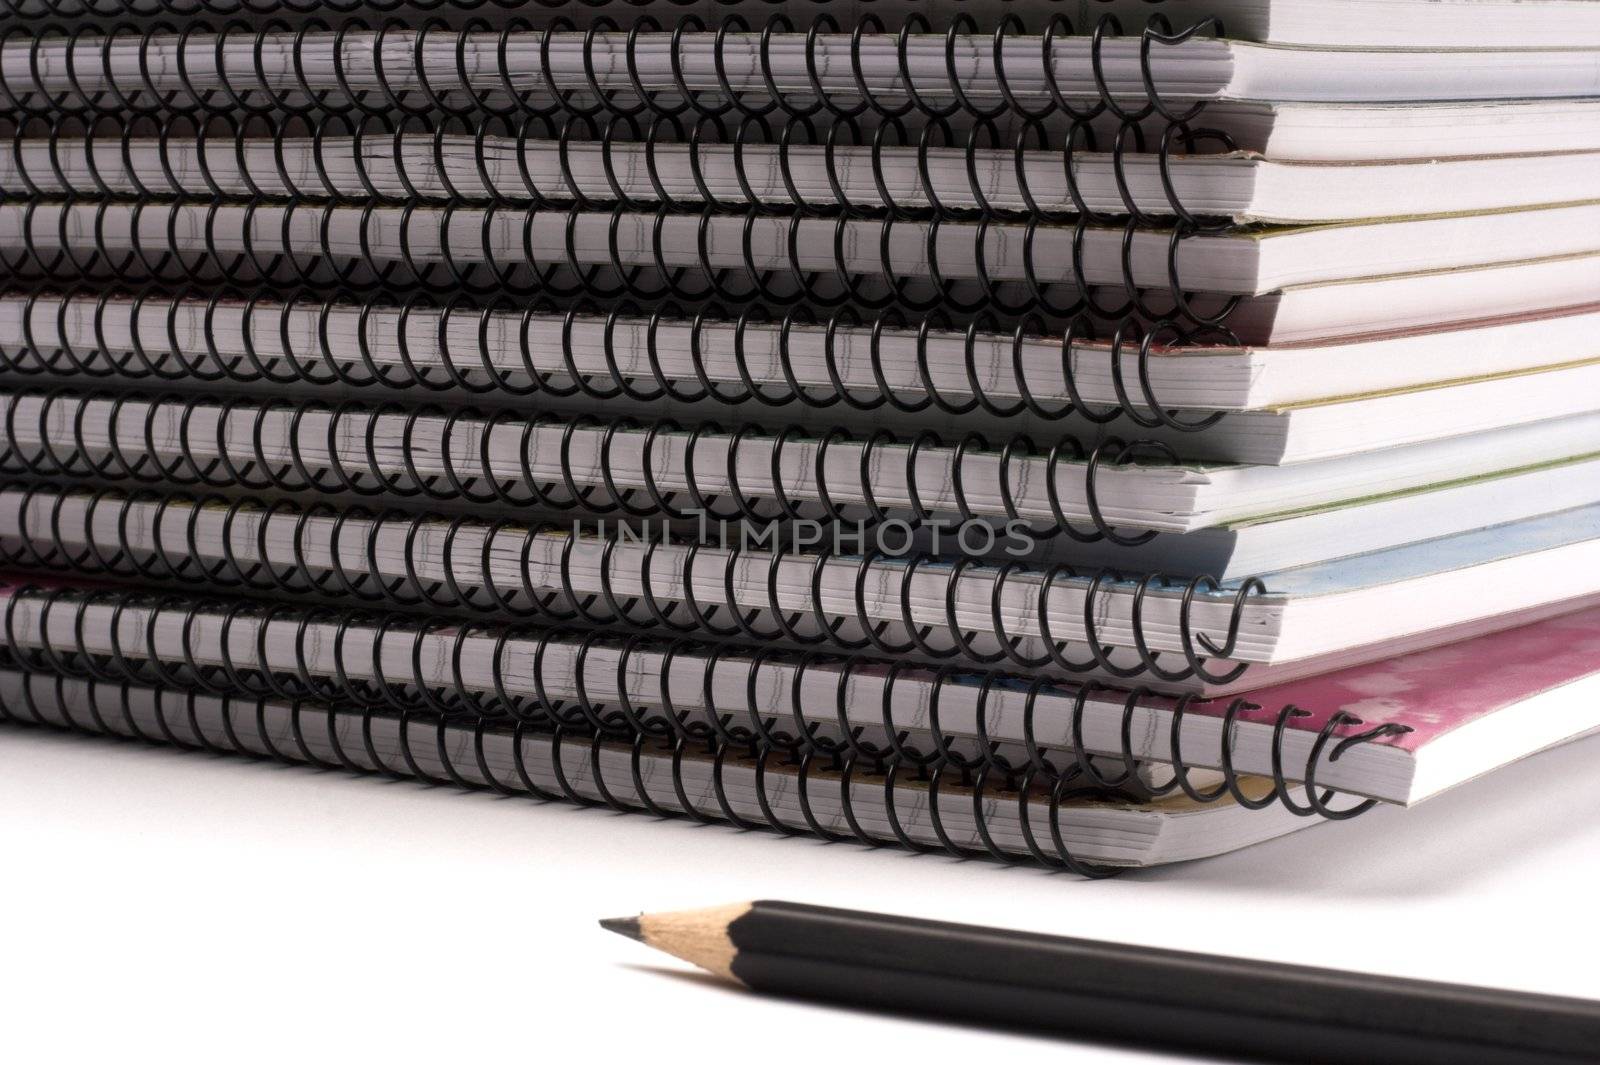 A pile of notebooks with pen